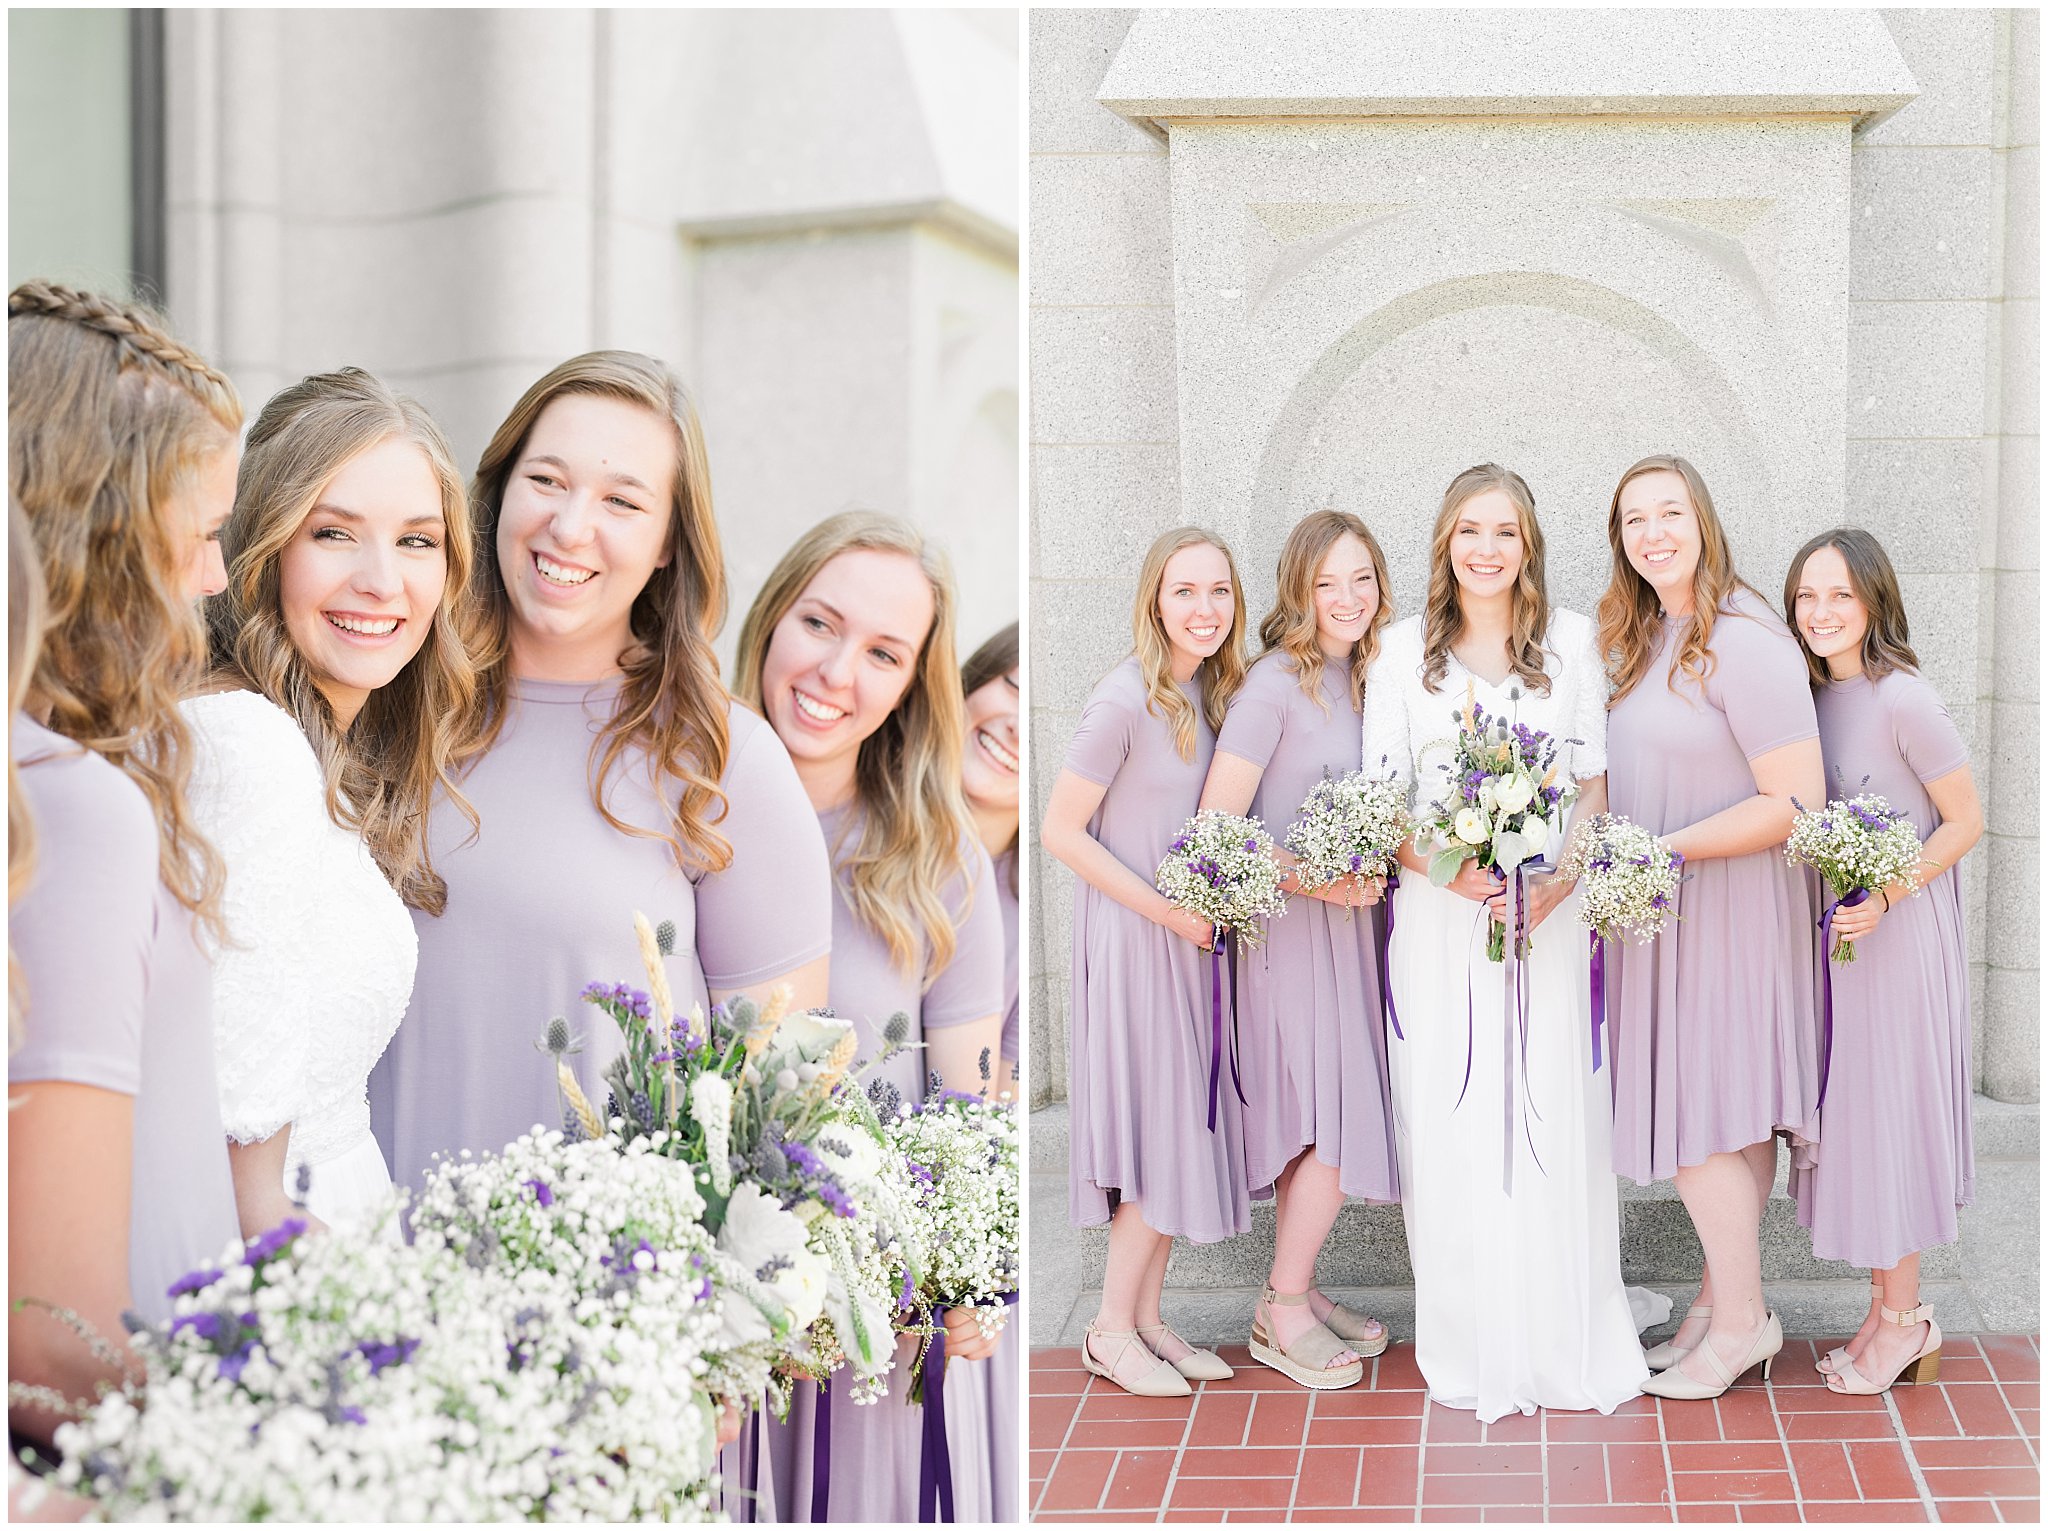 Lavender and grey bridesmaids photo at the Salt Lake Temple | Salt Lake Temple Wedding | Utah Wedding Photographers | Jessie and Dallin Photography